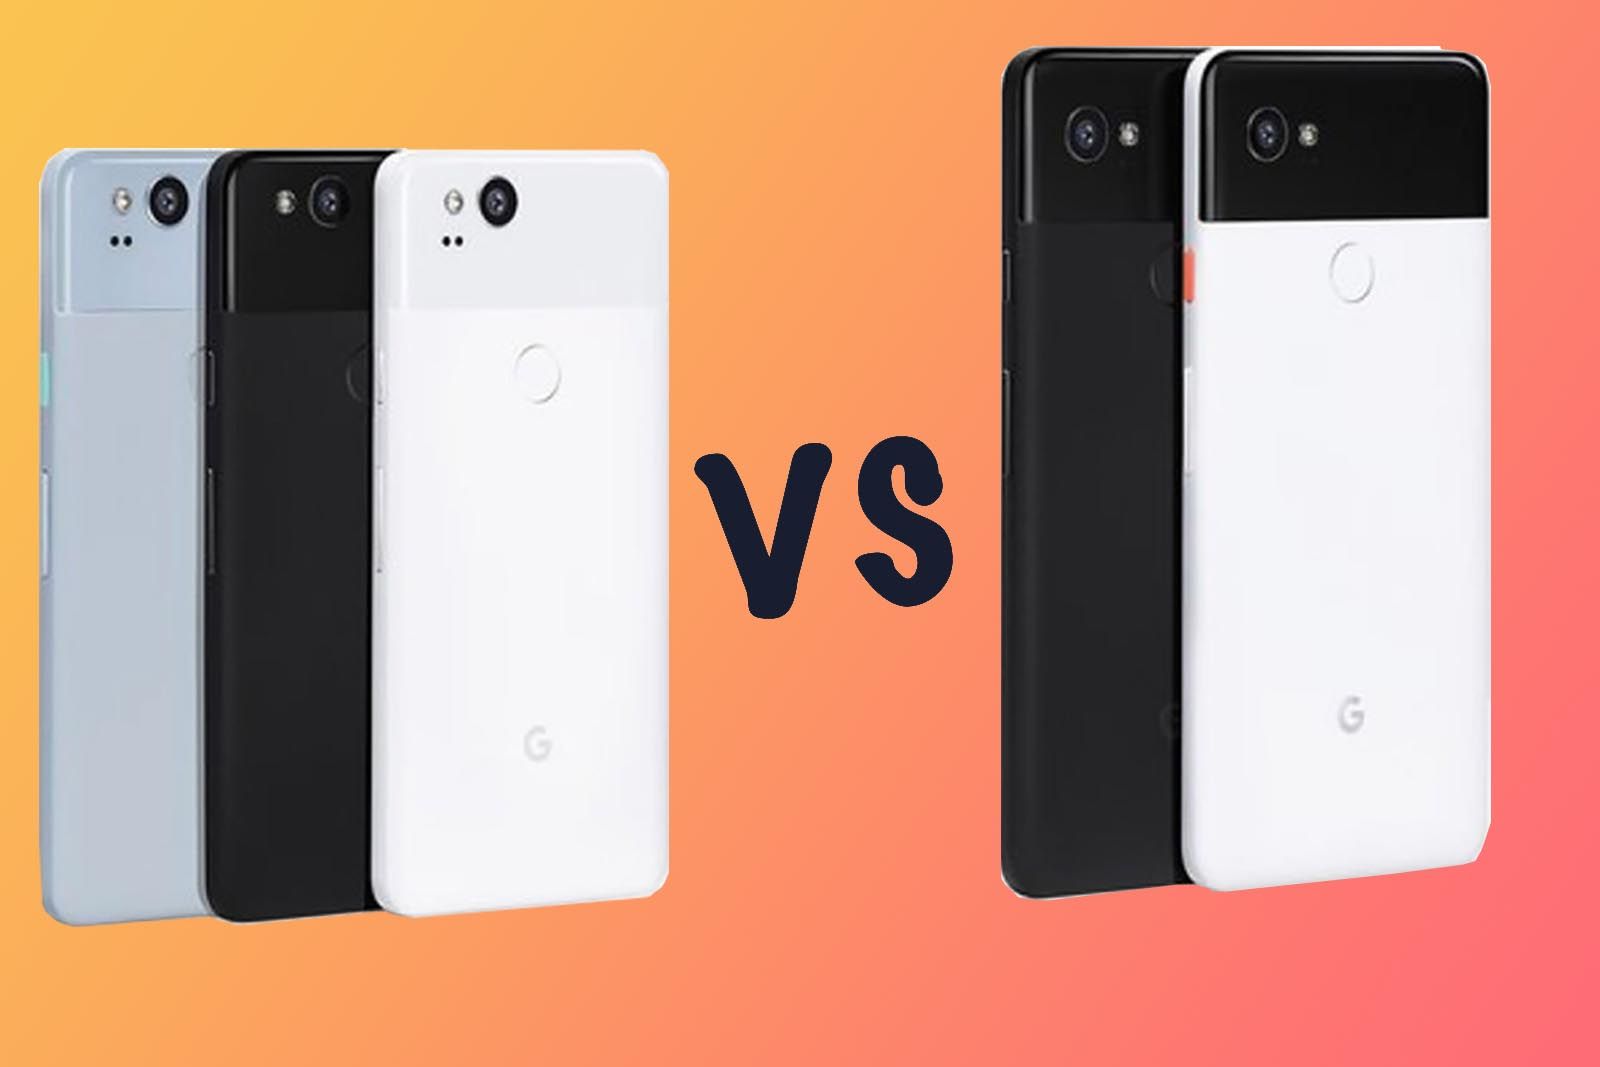 Google Pixel 2 vs Pixel 2 XL Whats the difference image 1